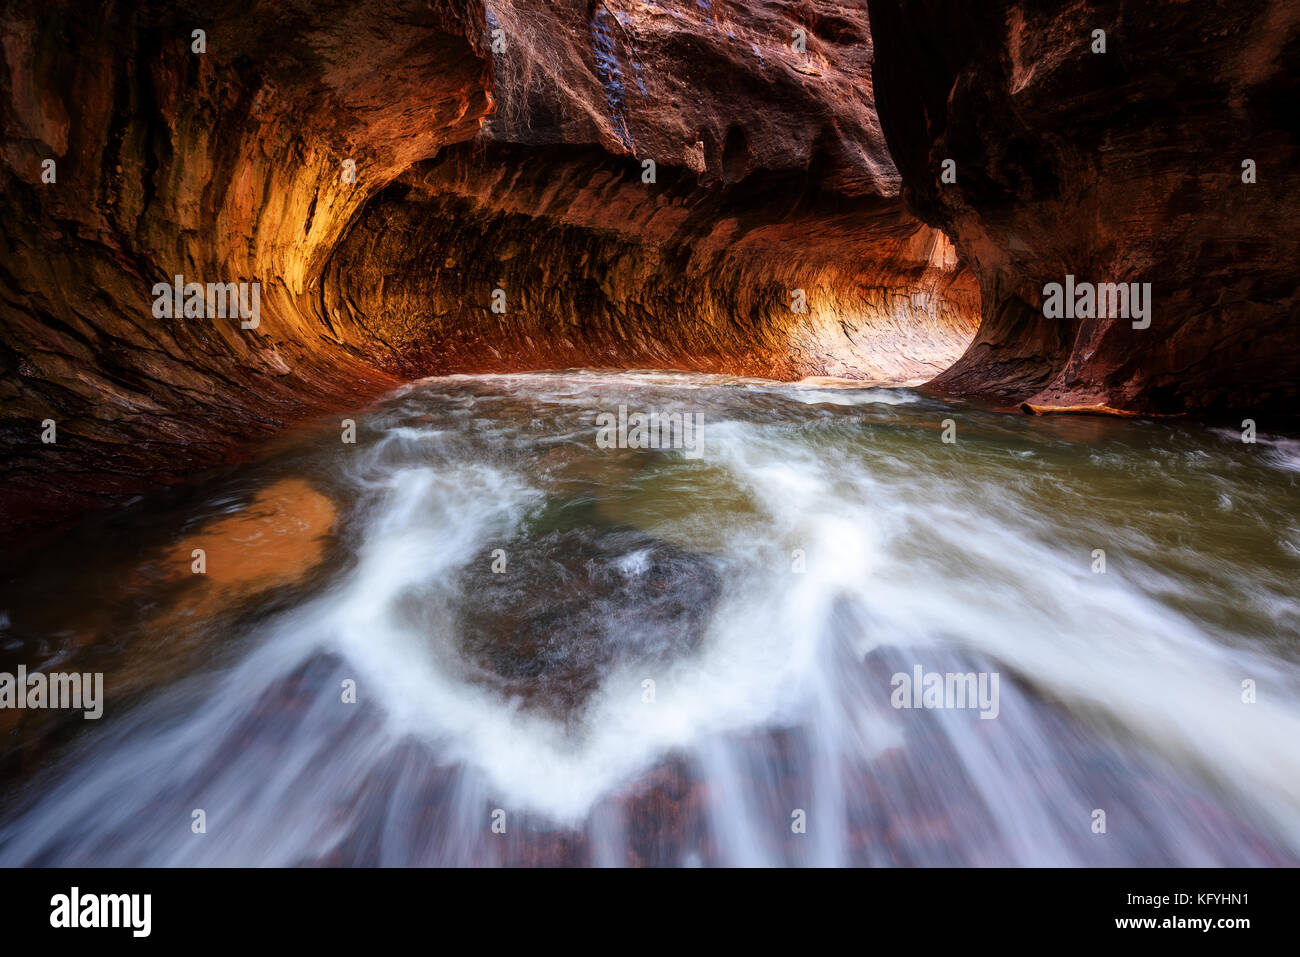 Beautiful shot of Subway tunnel with golden sunlight reflection in Zion National Park, Utah, USA. Hiking over water fall. Stock Photo